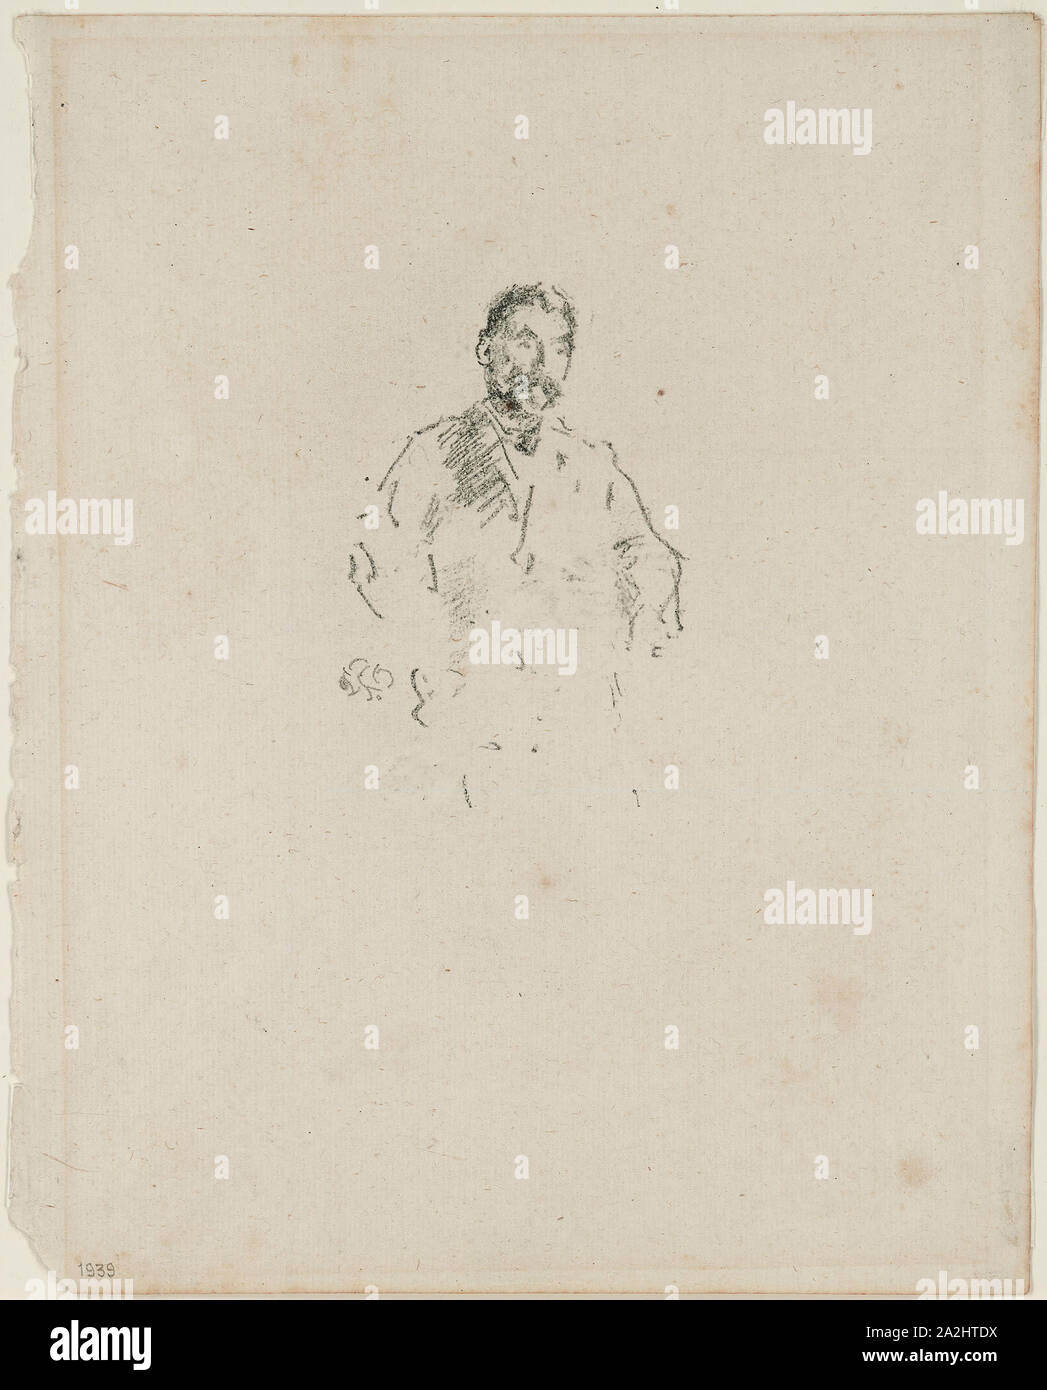 Stephane Mallarmé, No. 2, 1892, James McNeill Whistler, American, 1834-1903, United States, Transfer lithograph in black with scraping, on cream laid paper, 93 x 61 mm (image), 226 x 181 mm (sheet Stock Photo